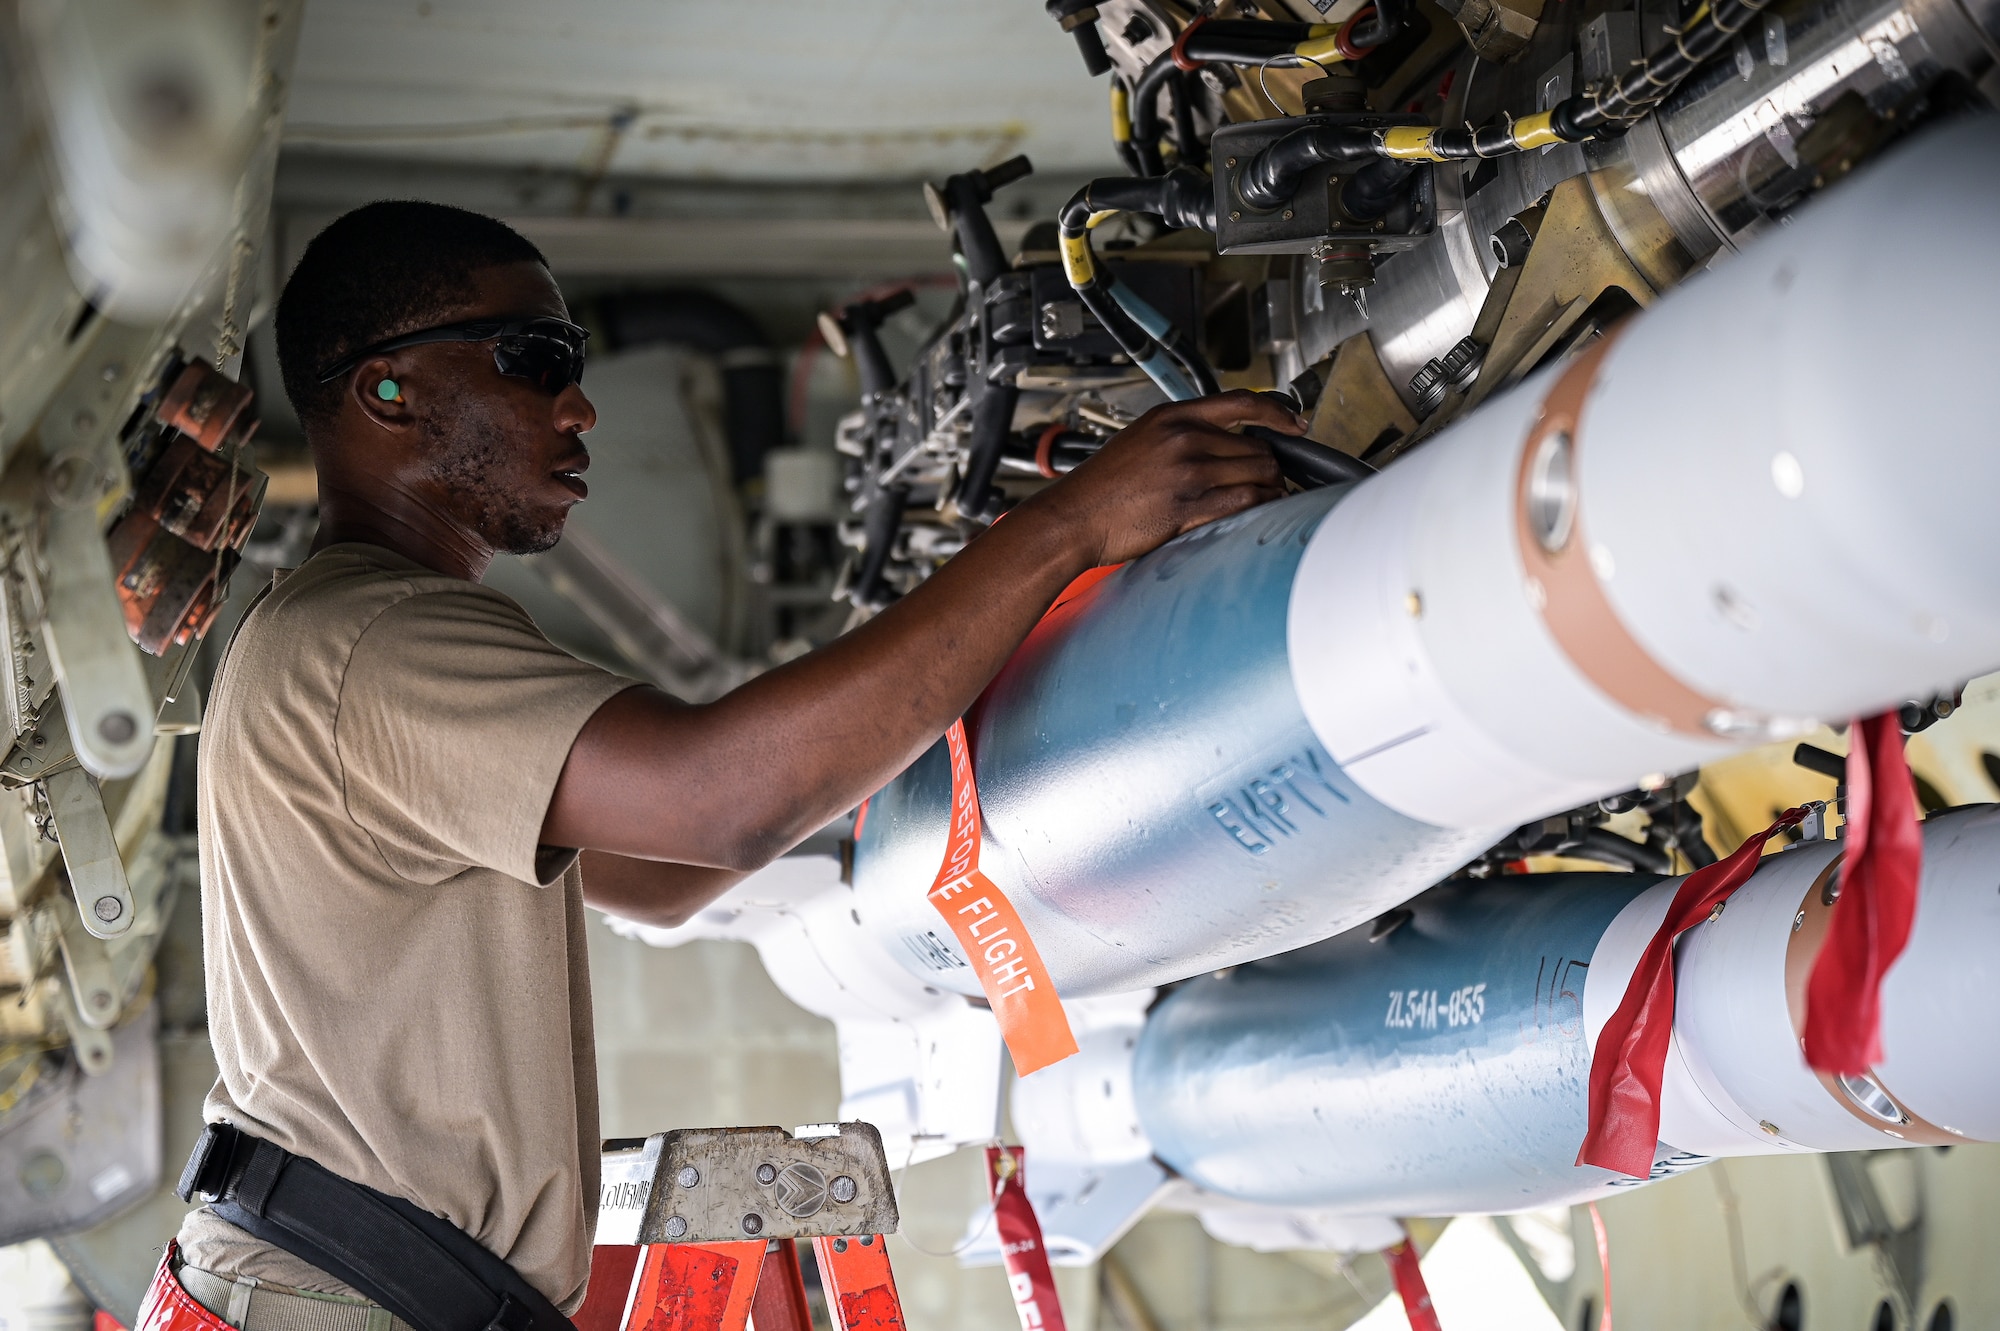 Staff Sgt. Schnathan Johnson, 96th Aircraft Maintenance Unit weapons load team chief, latches a GBU-12 munition to the bomb bay of a B-52H Stratofortress during Combat Hammer at Barksdale Air Force Base, Louisiana, June 7, 2022. Combat Hammer is a week-long evaluation of the wing’s capacity to generate, load and employ conventional weapons on target. (U.S. Air Force photo by Senior Airman Jonathan E. Ramos)